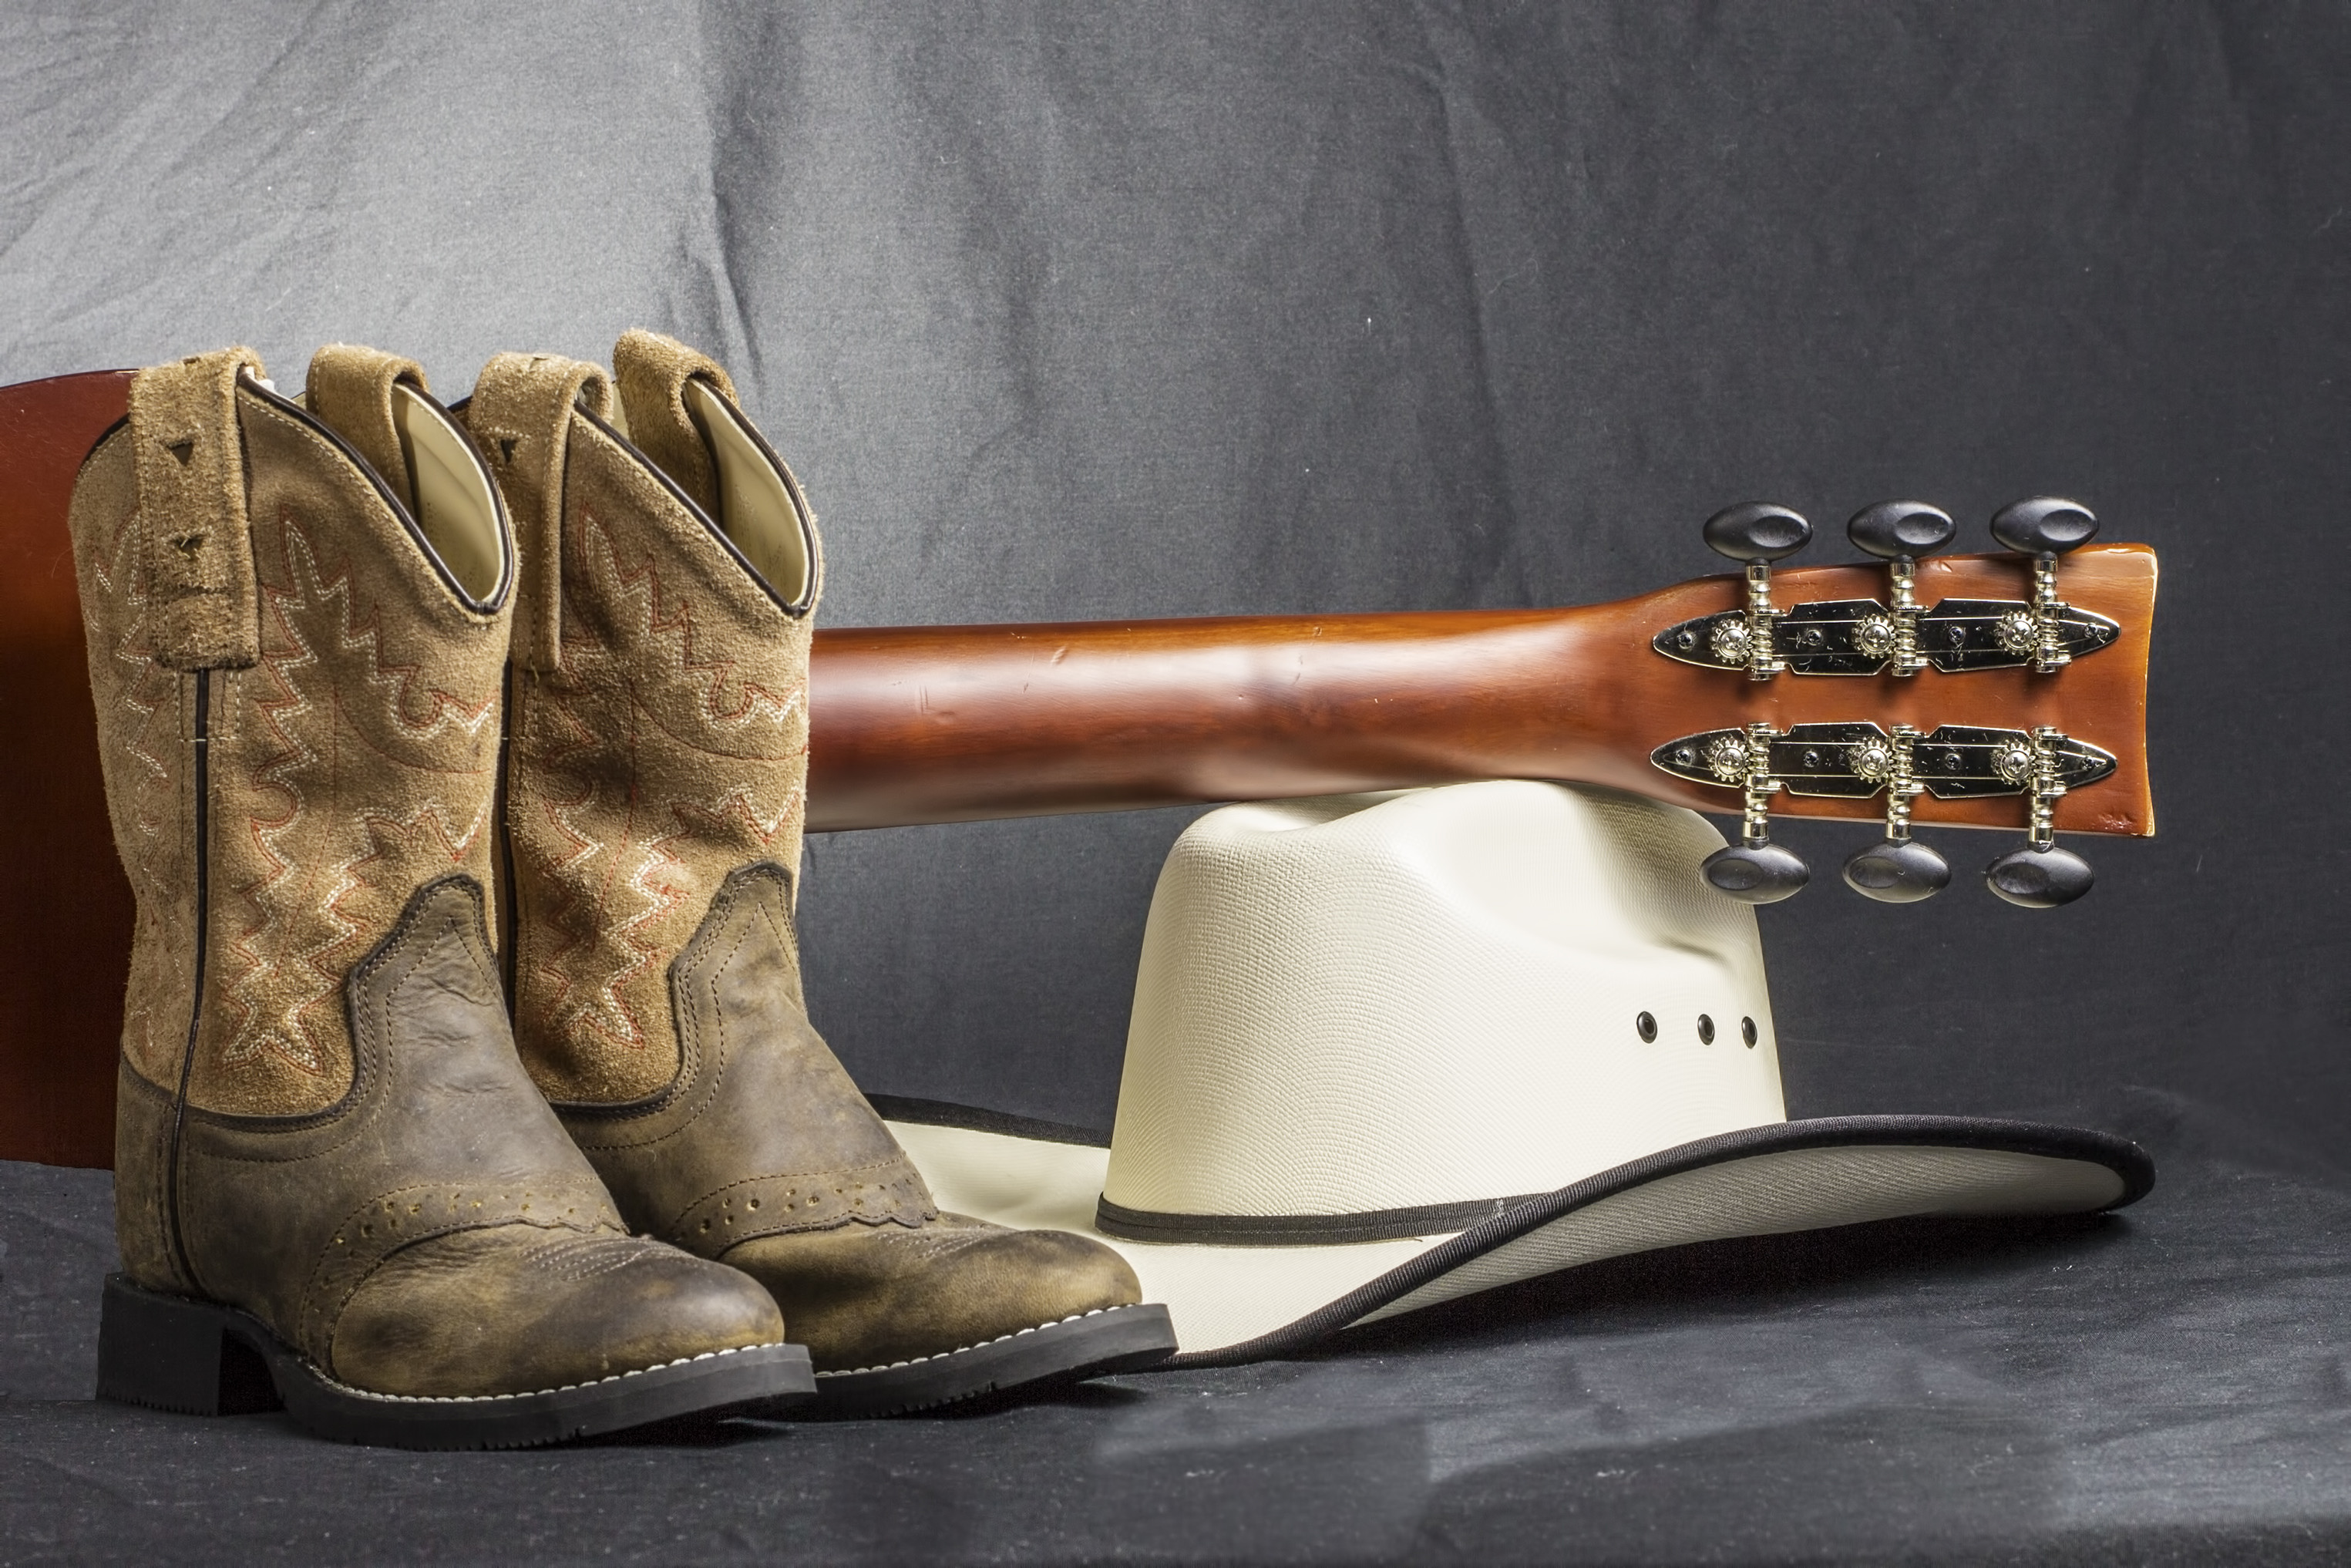 3050x2034 Cowboy hat and boots wallpaper - photo#20